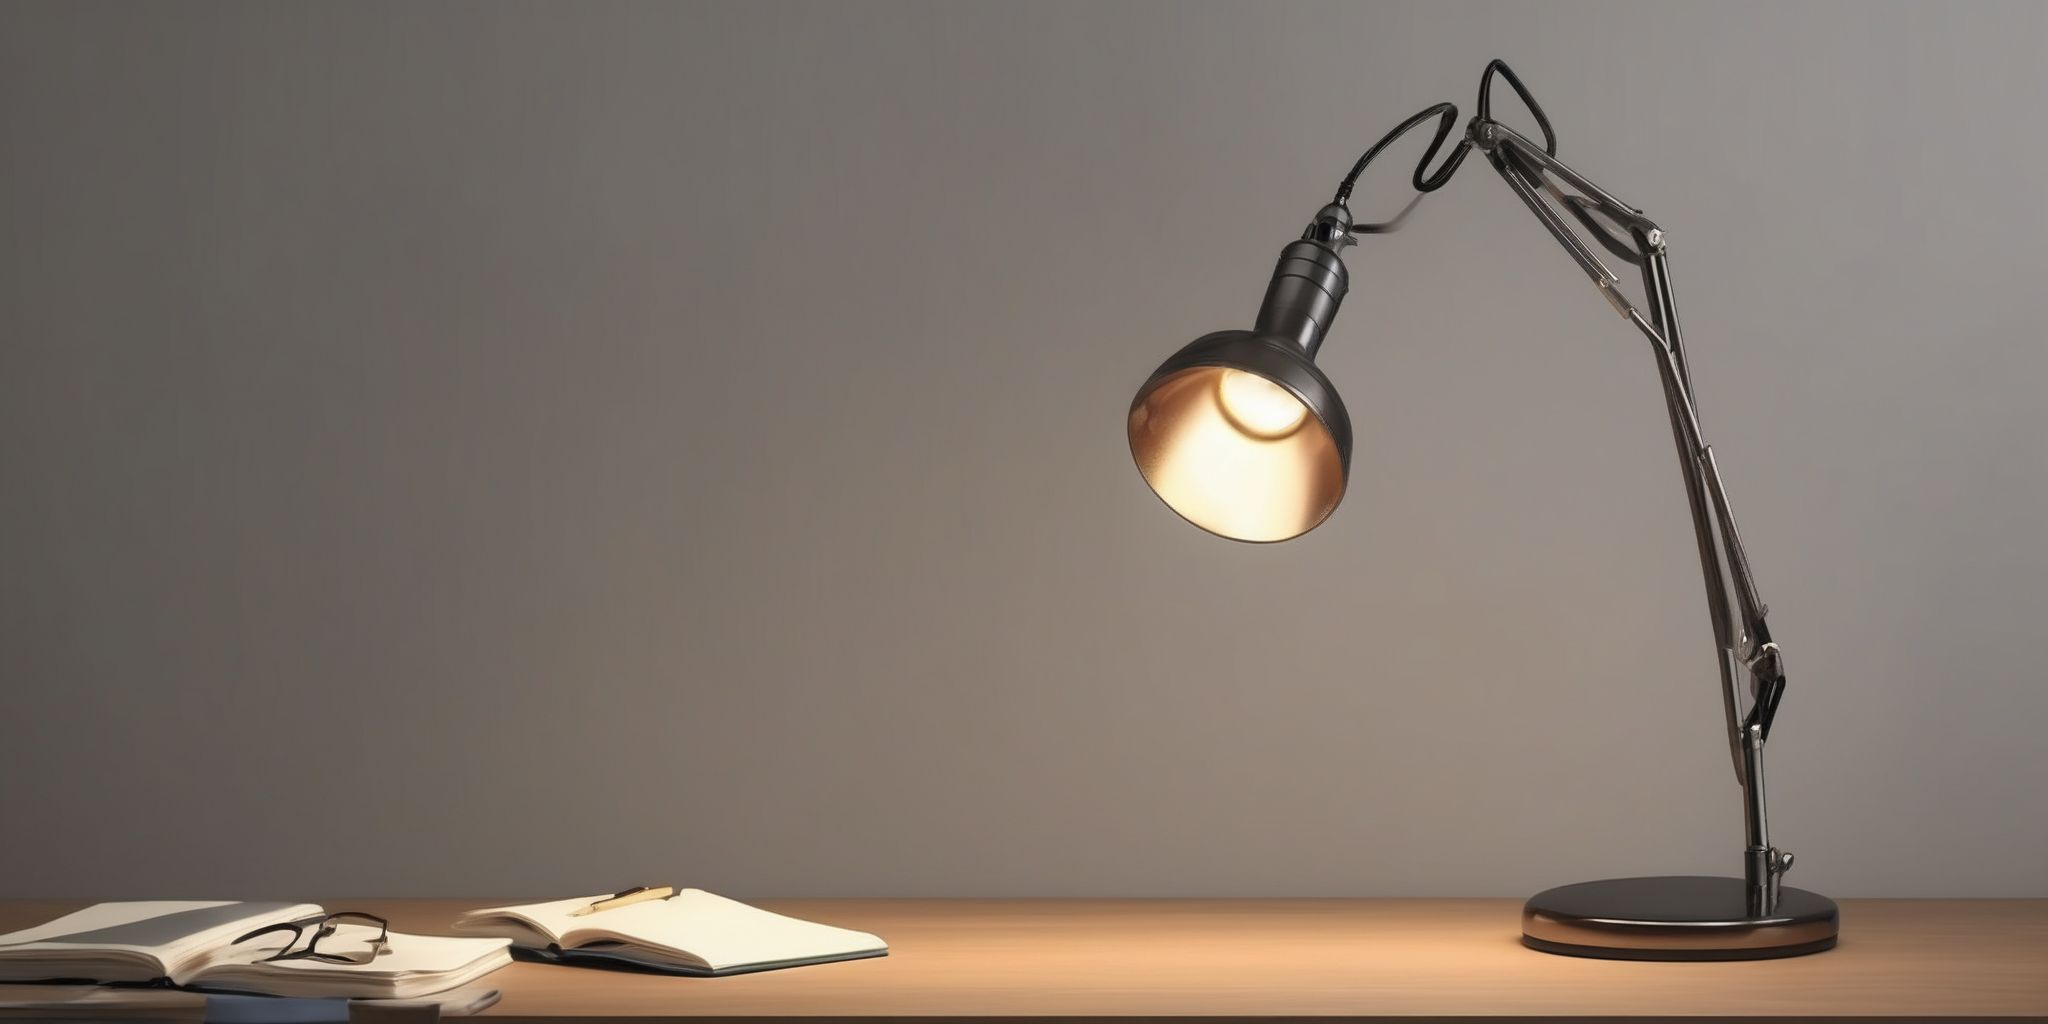 Desk lamp  in realistic, photographic style